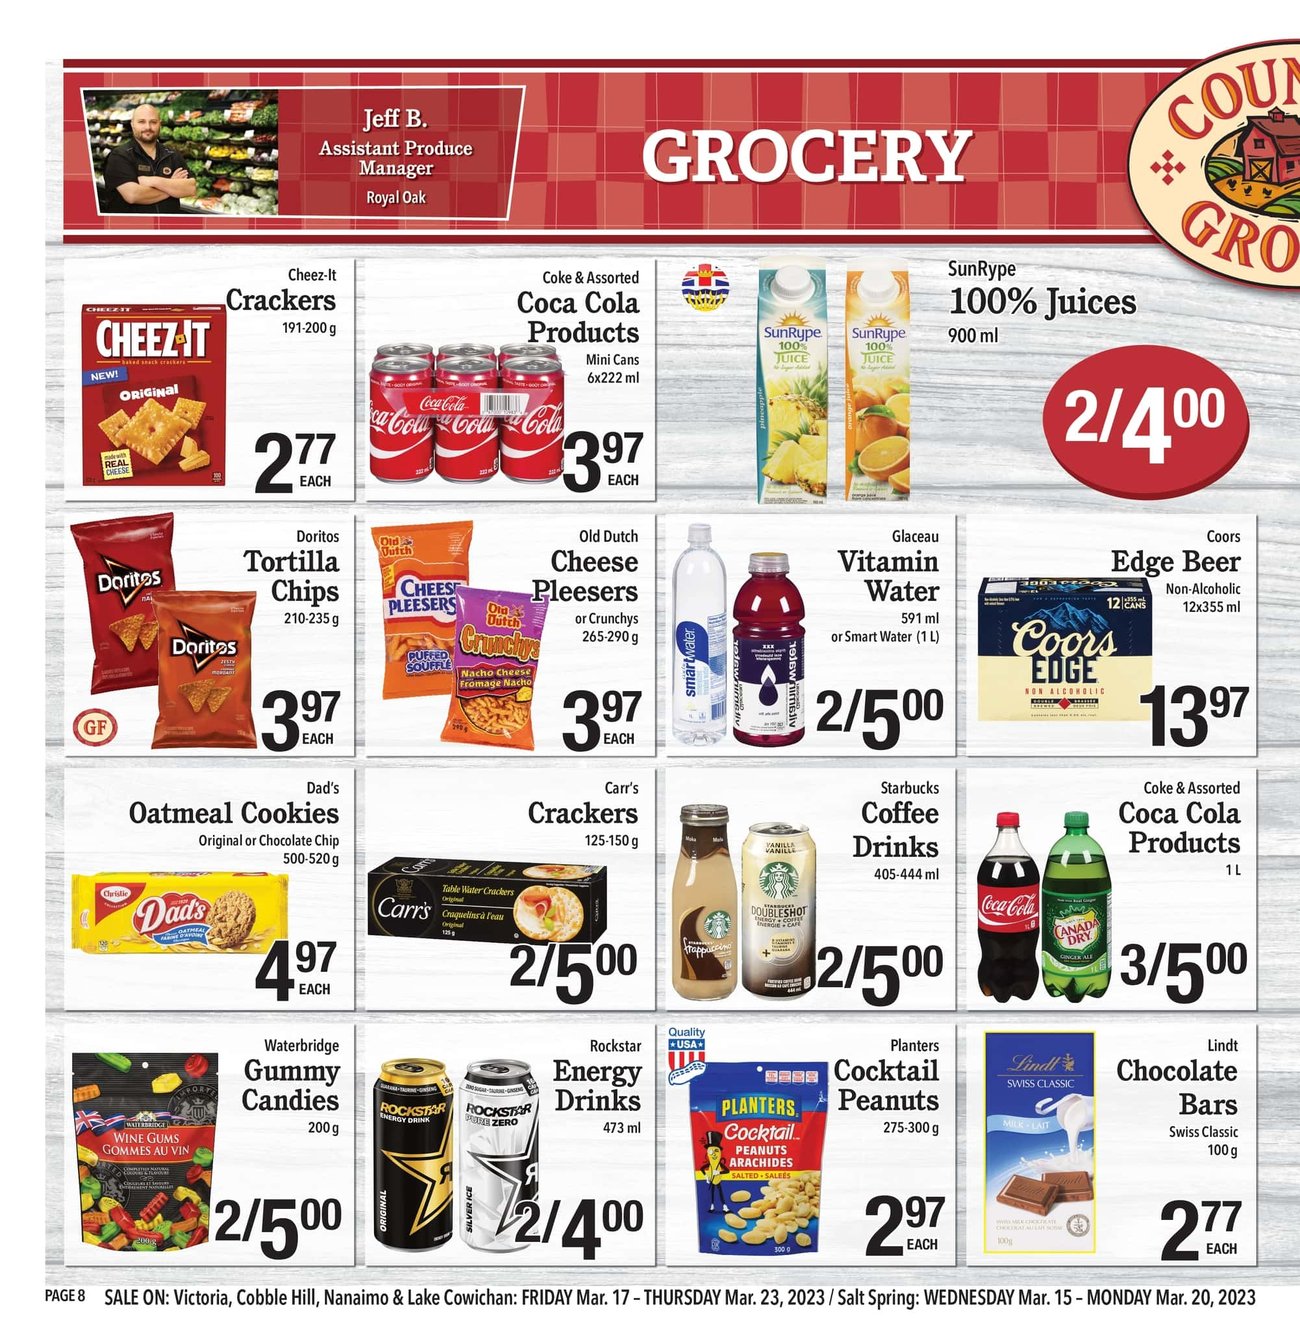 Country Grocer - Weekly Flyer Specials - Page 8